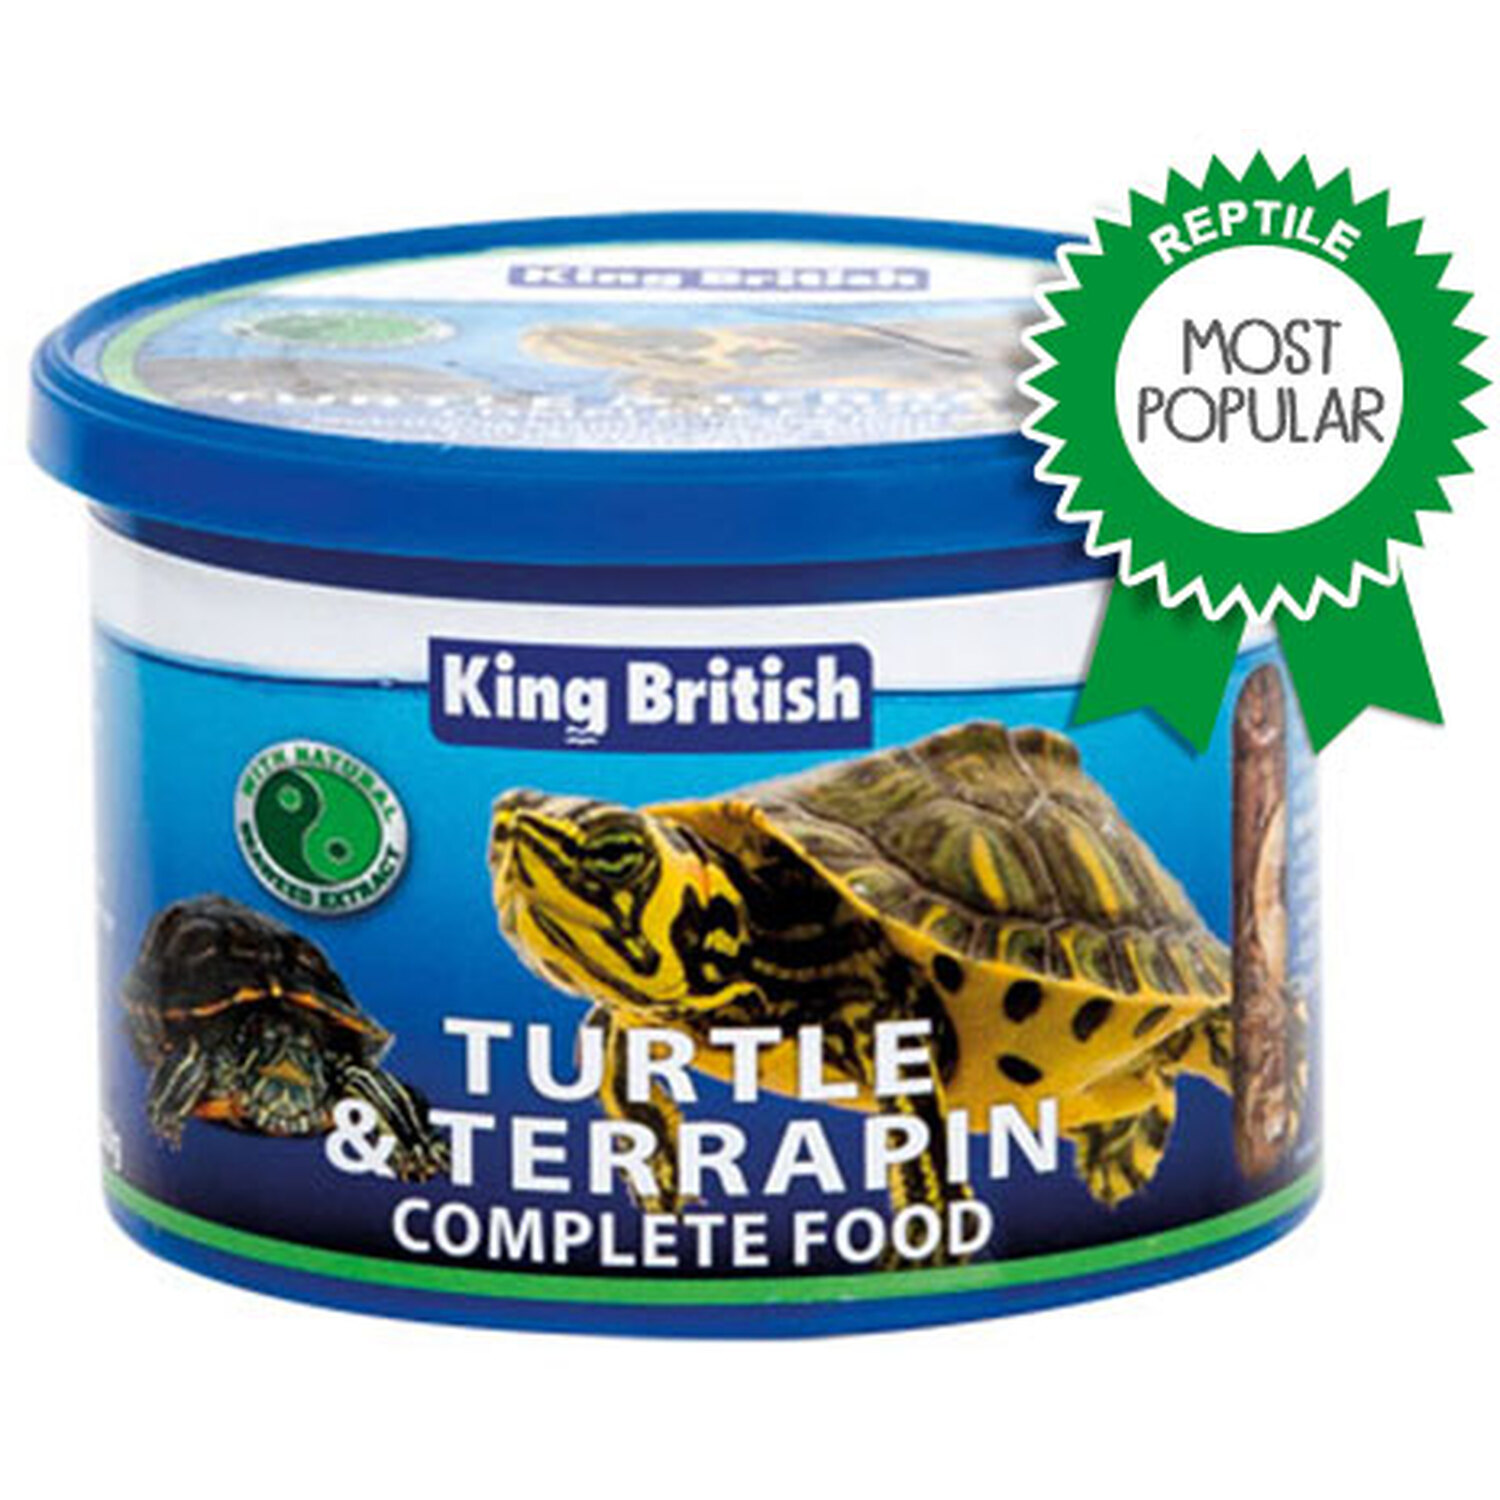 King British Turtle and Terrapin Complete Food 80g Image